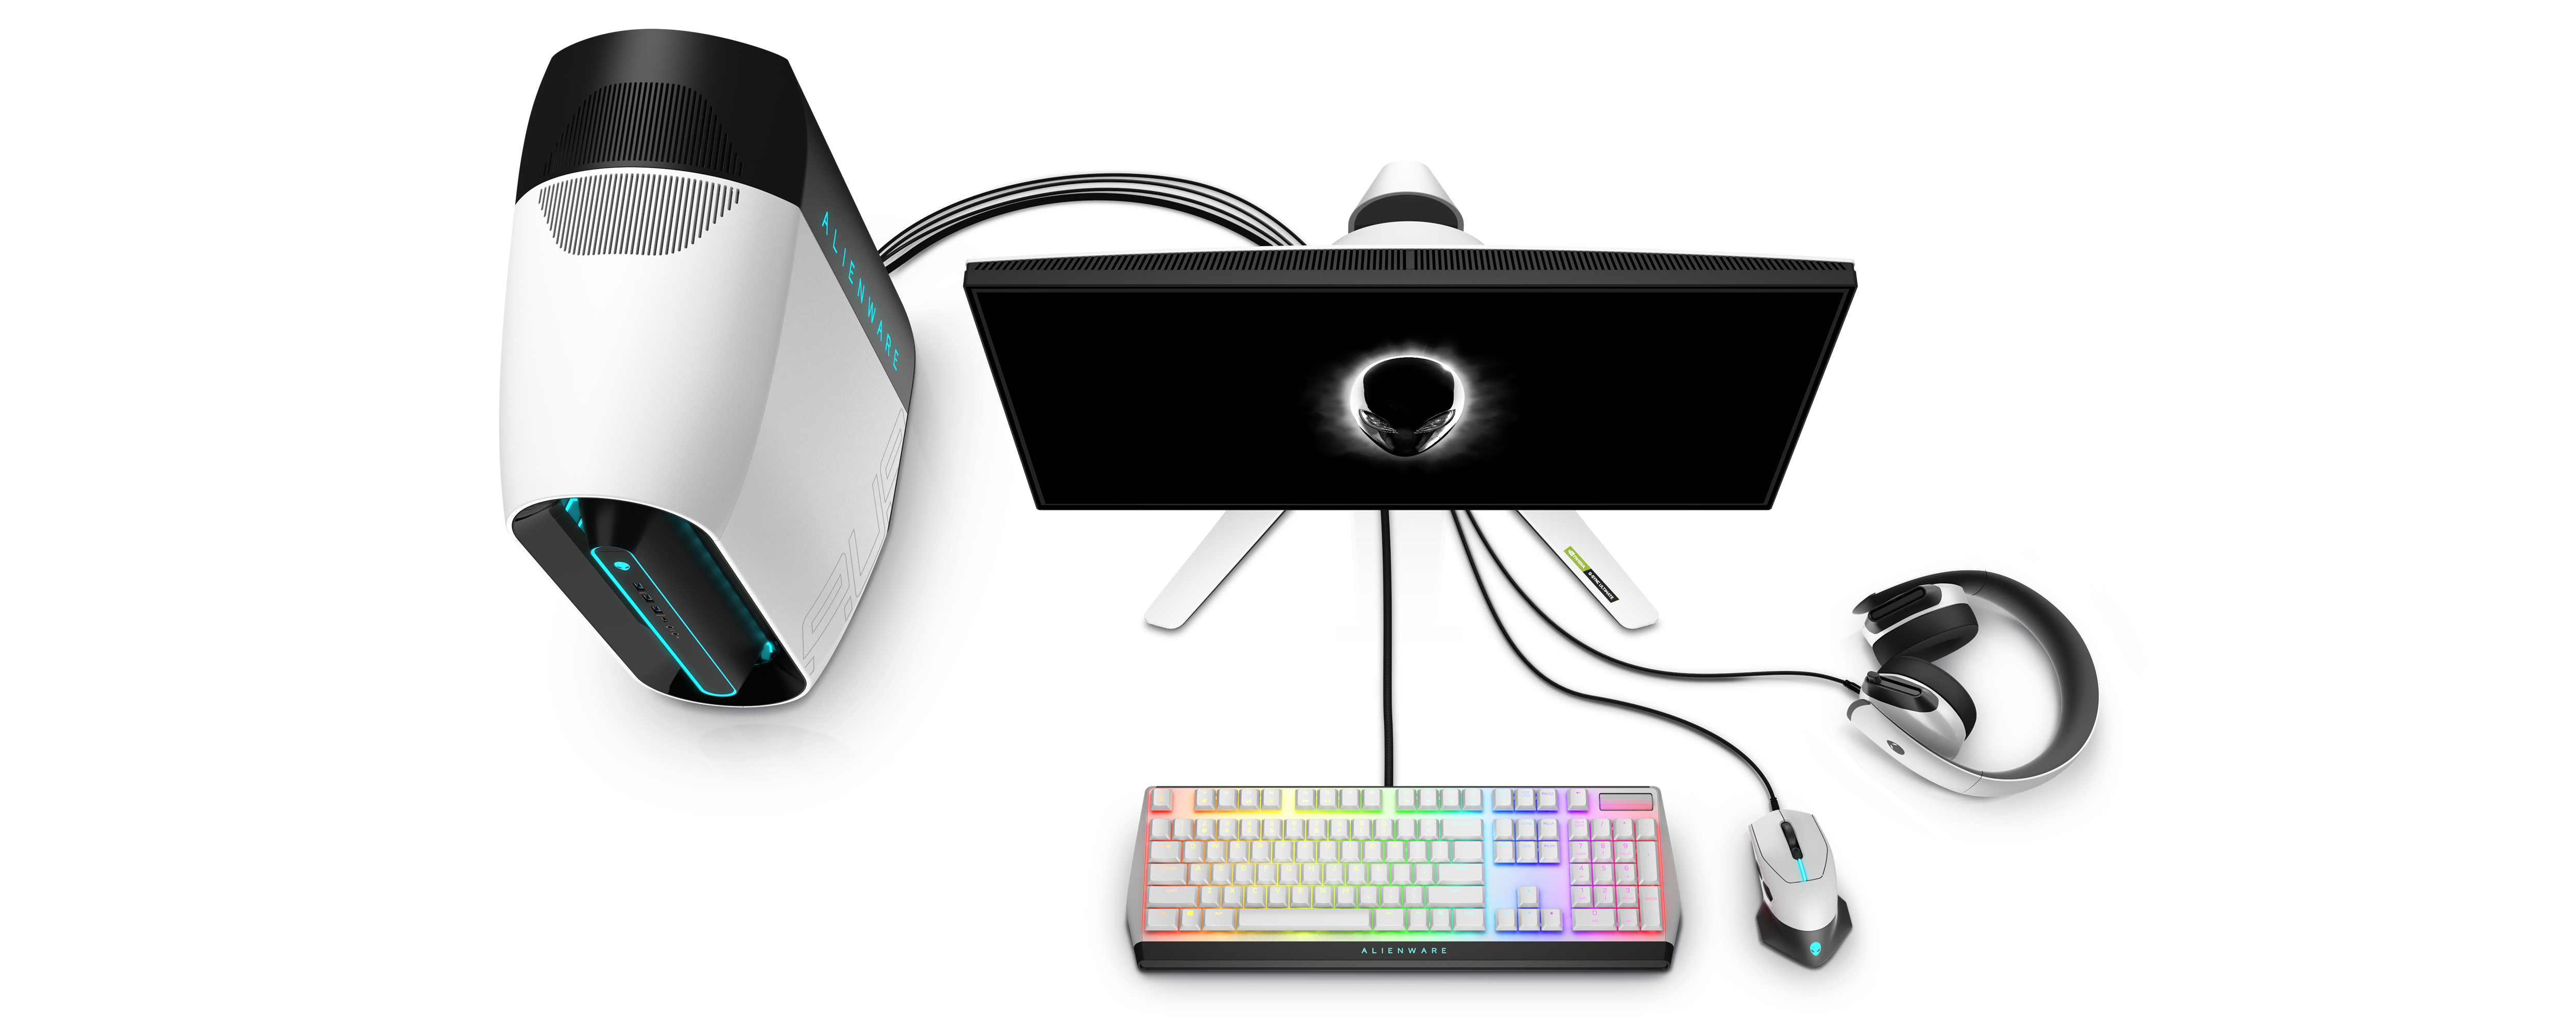 ESSENTIAL ACCESSORIES FOR YOUR ALIENWARE GAMING MONITOR